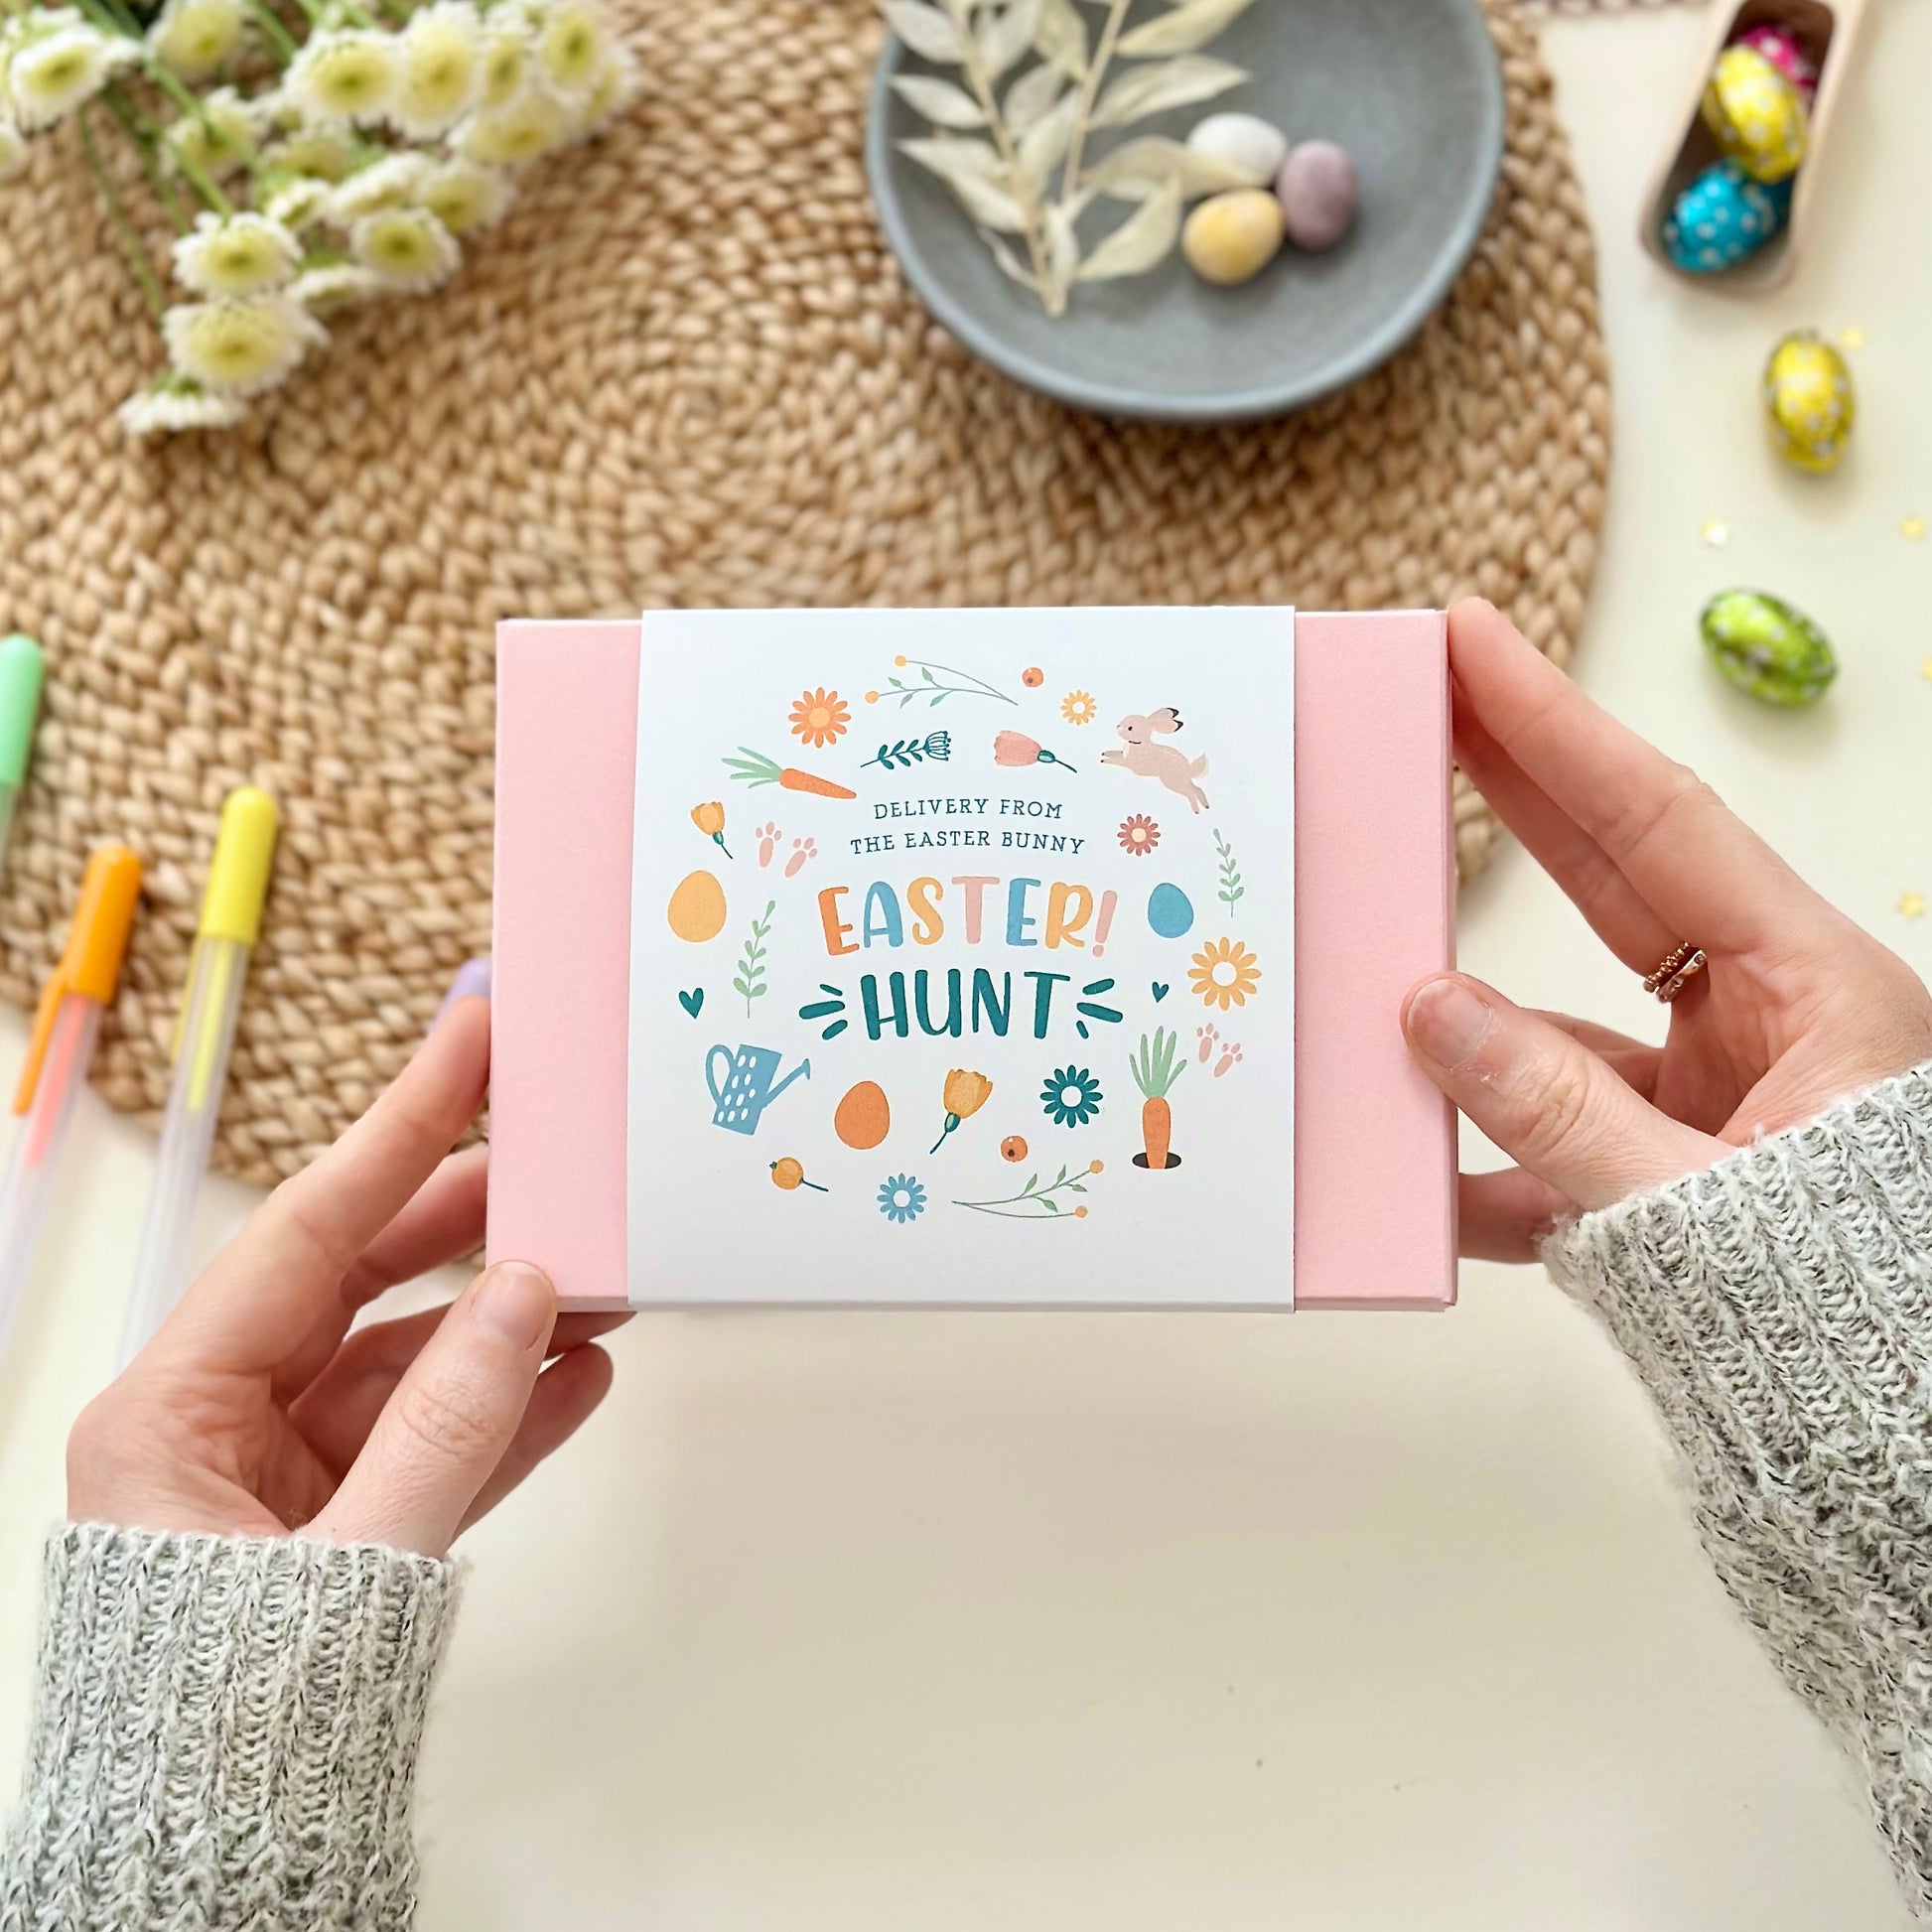 Easter Egg Hunt With Scratch Card Clues. Have some family fun this Easter with our festive themed scratch card Easter hunt, including a card from the Easter Bunny and presentation box.